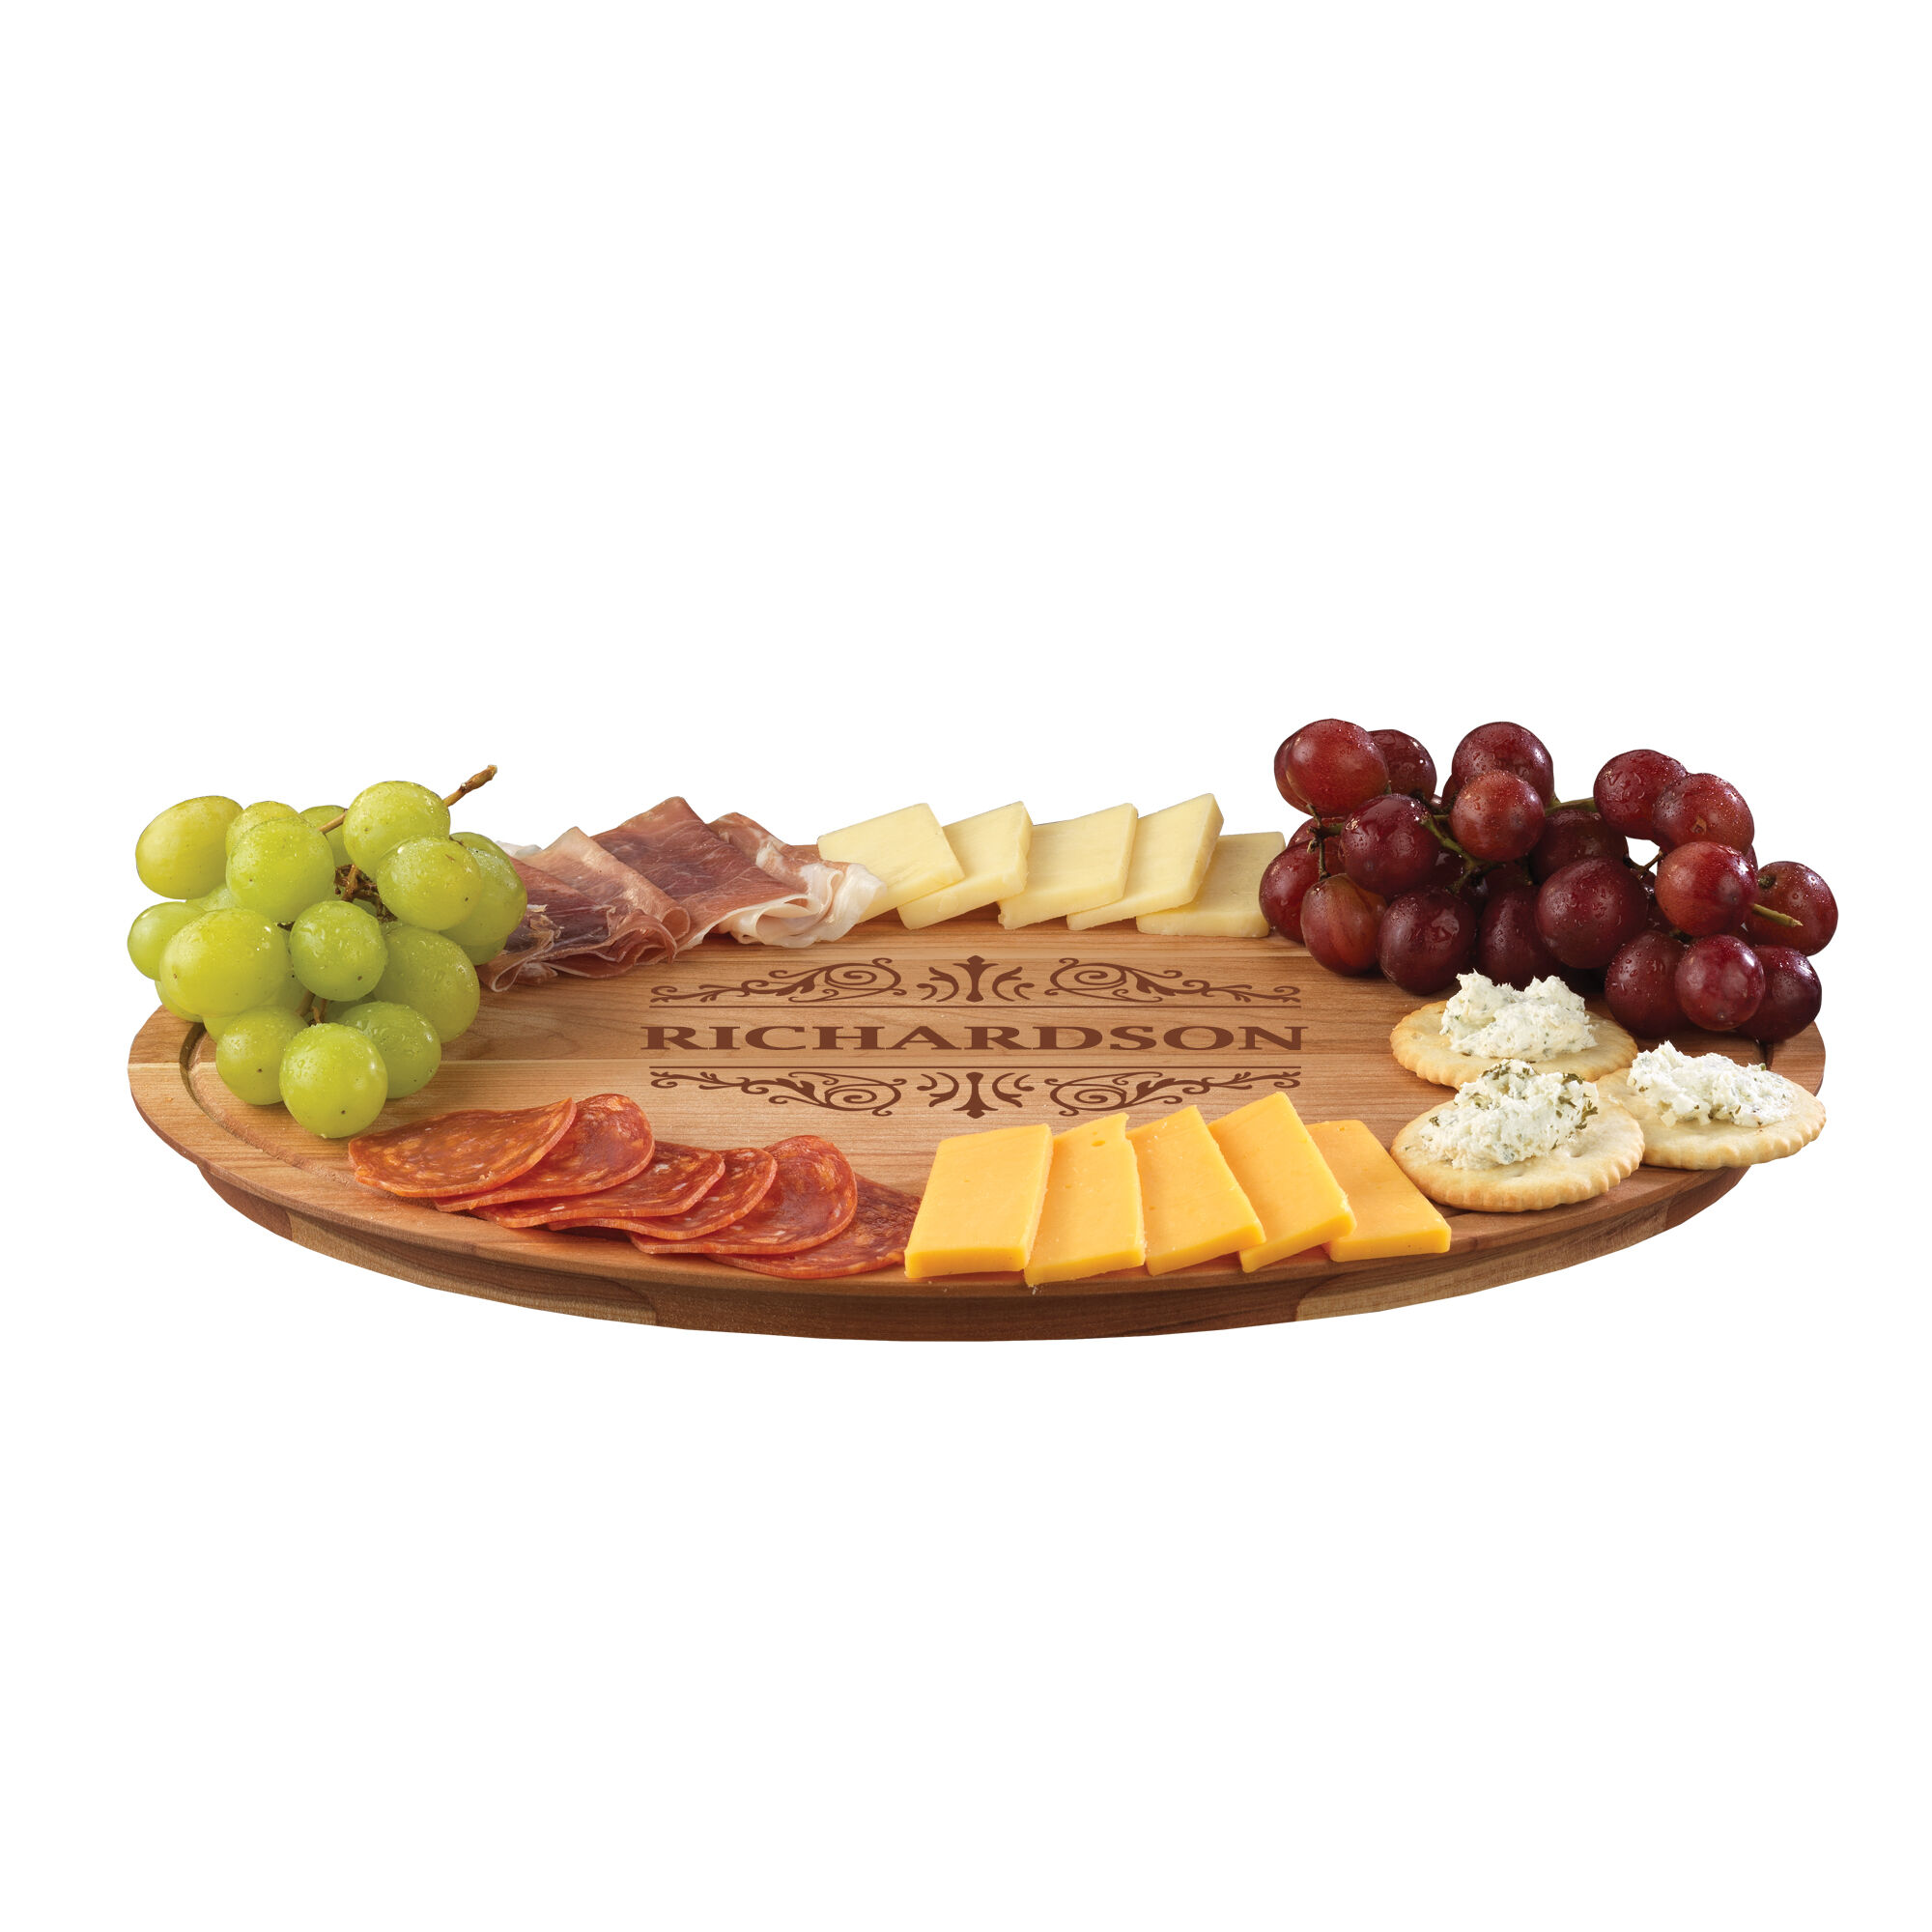 The Personalized Deluxe Serving Board 5611 0018 c sideview